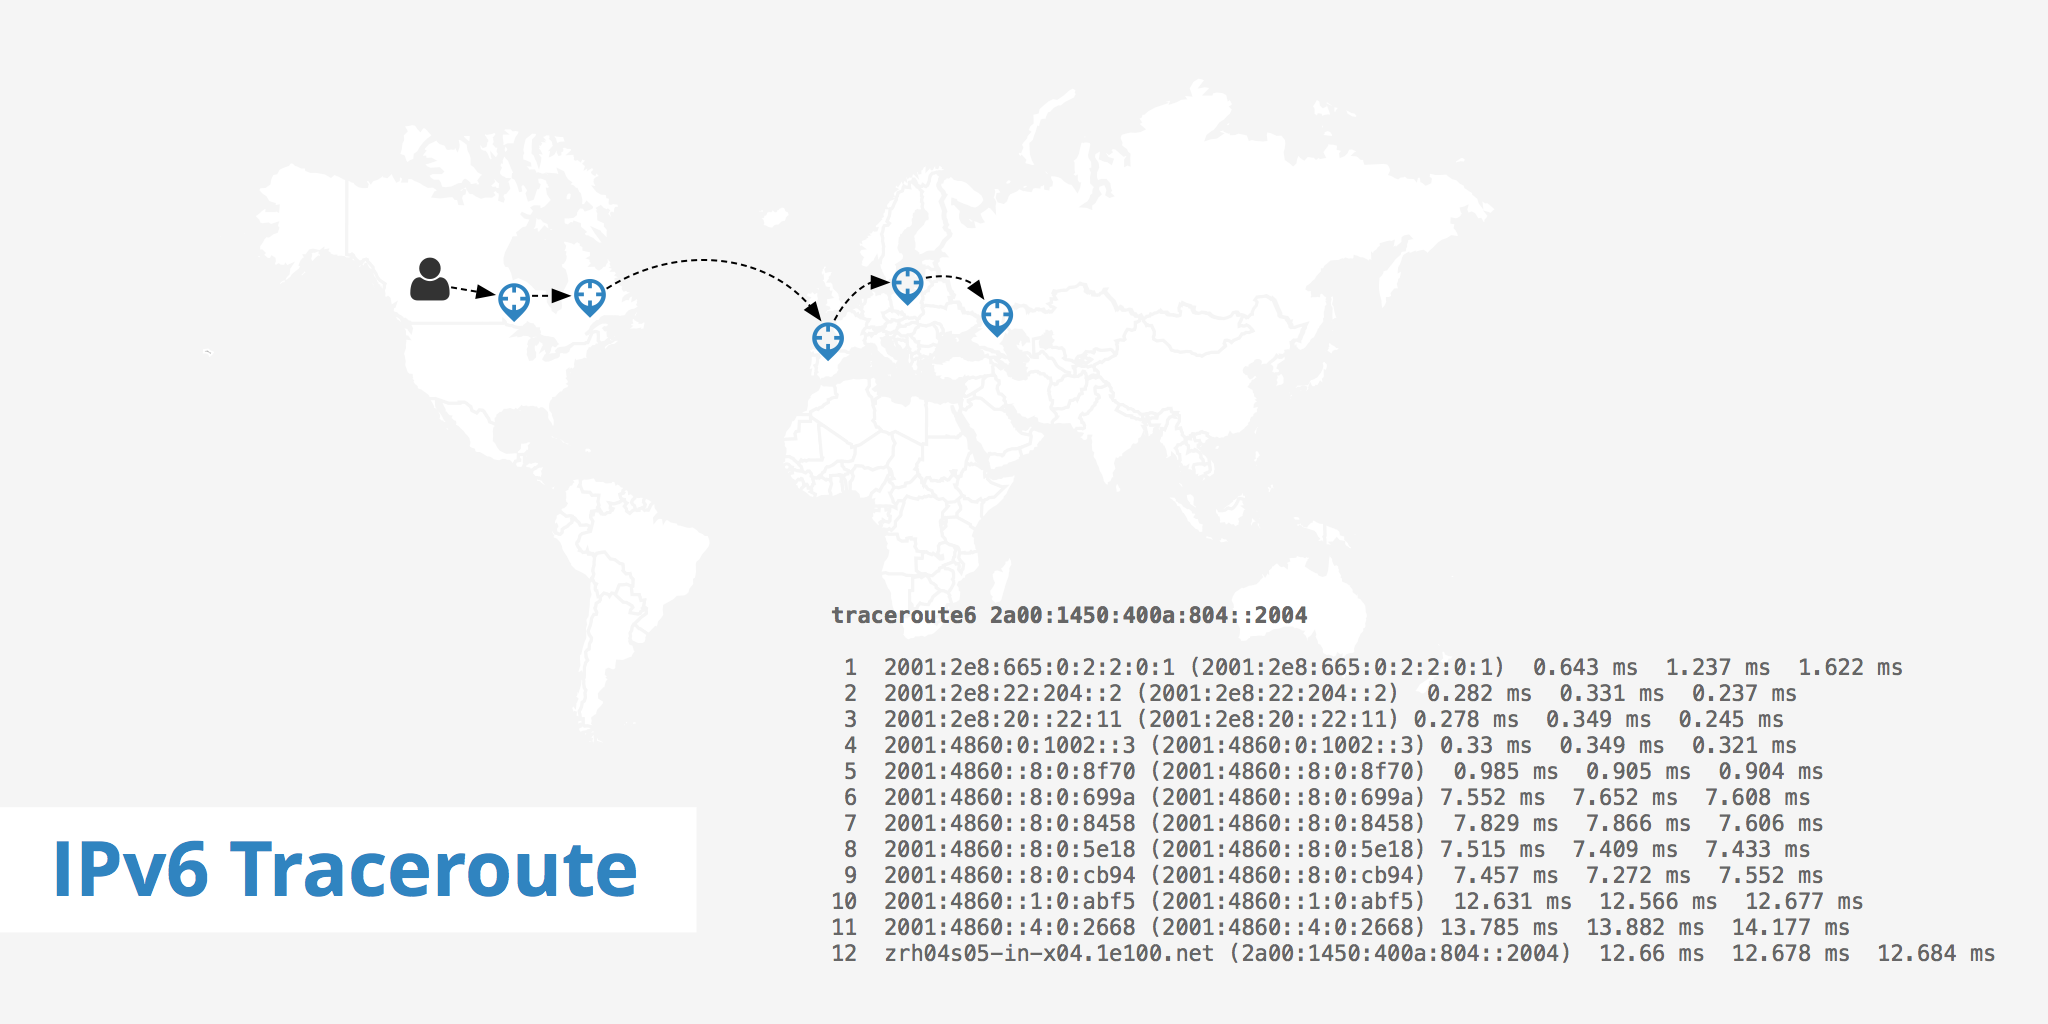 IPv6 Traceroute